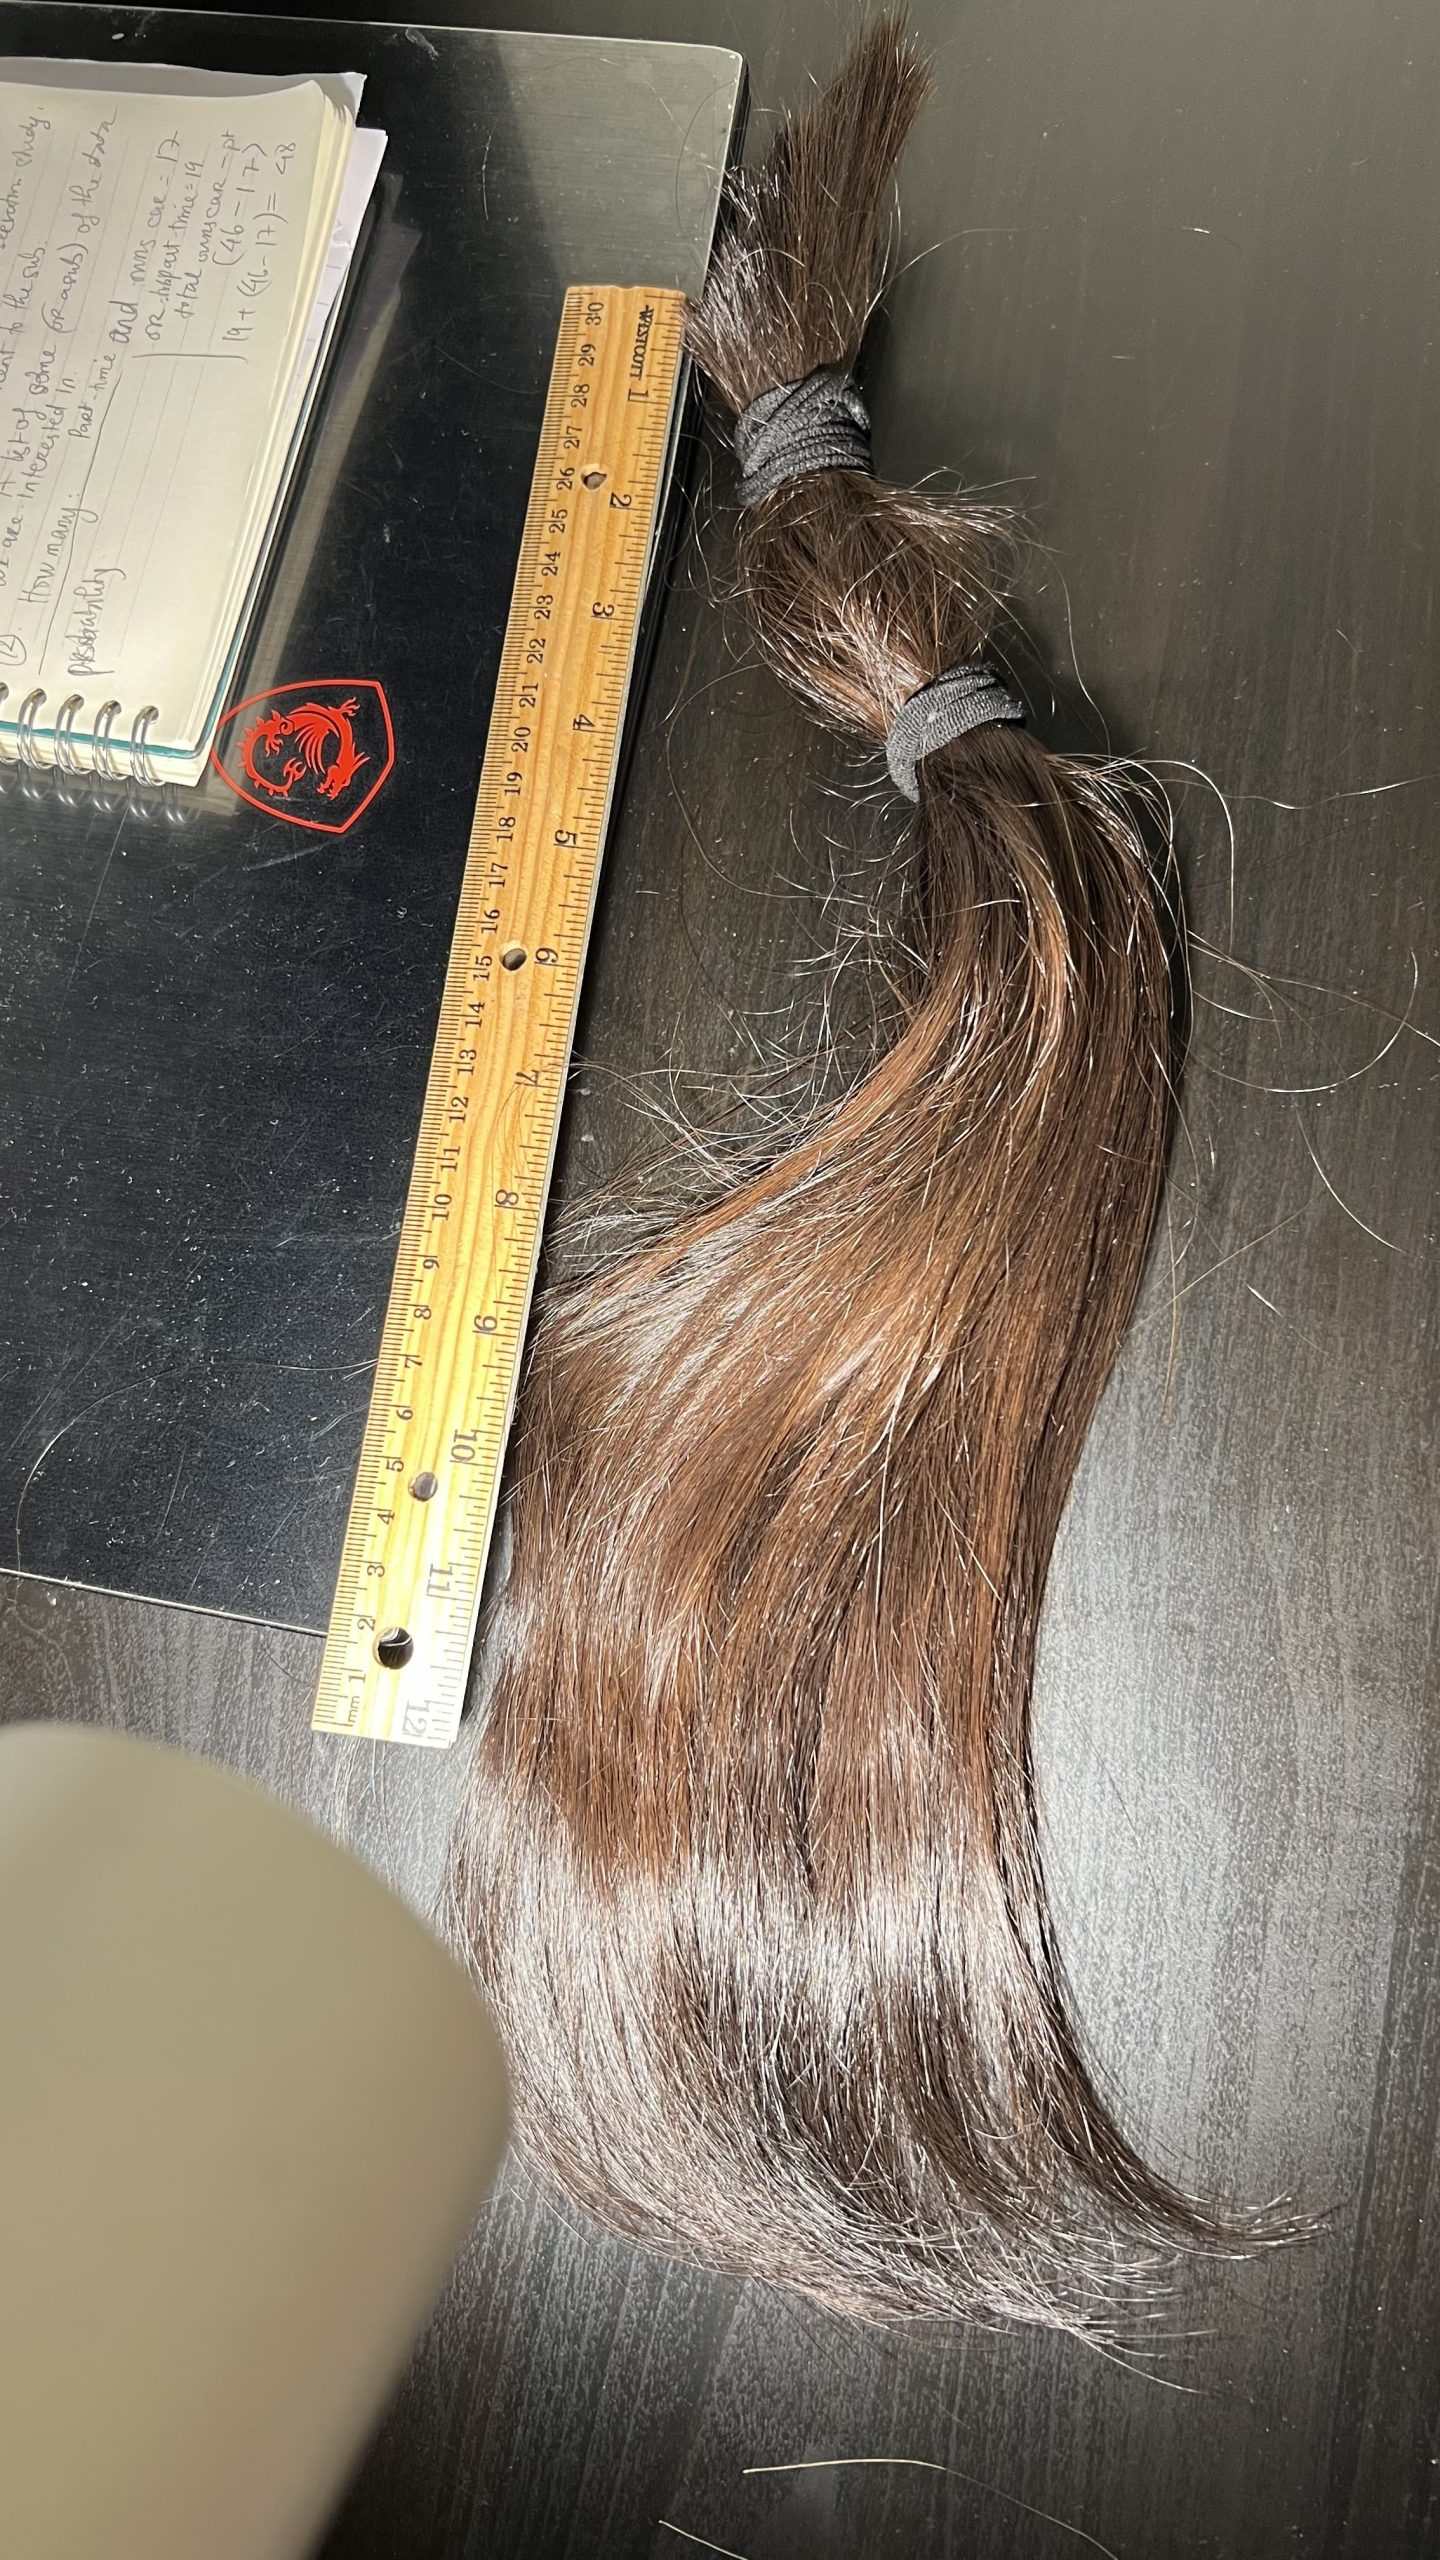 17 inches. Color is black and turn slightly brown in the sunlight.